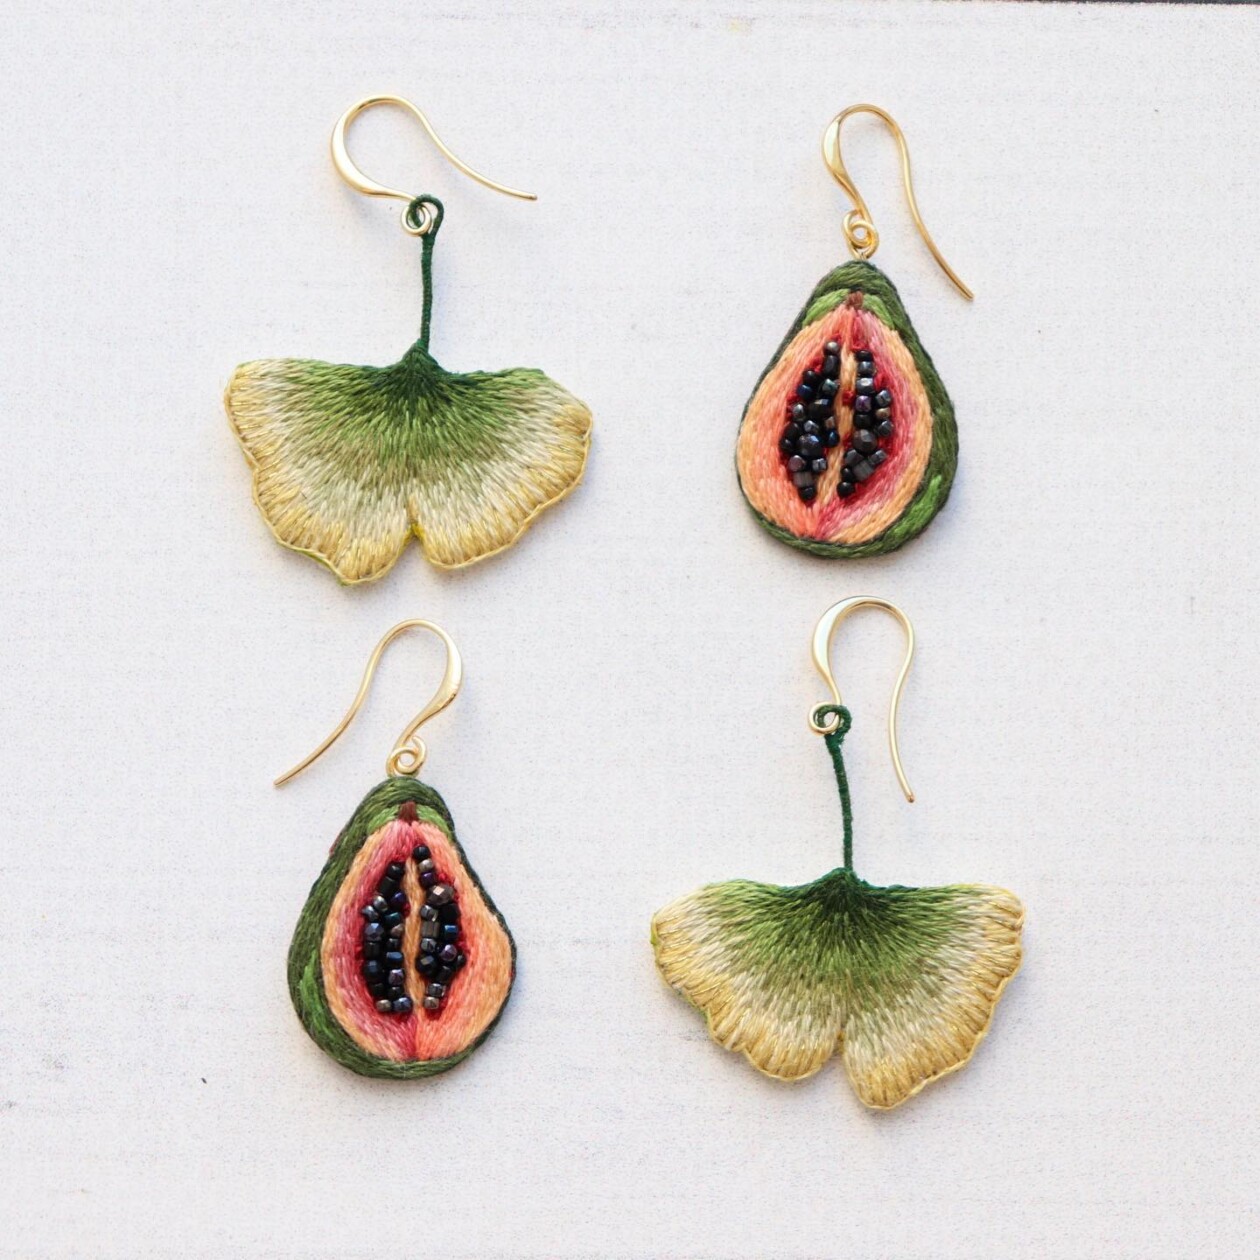 Eye Catching Handmade Embroidered Earrings By Vivaembr (6)